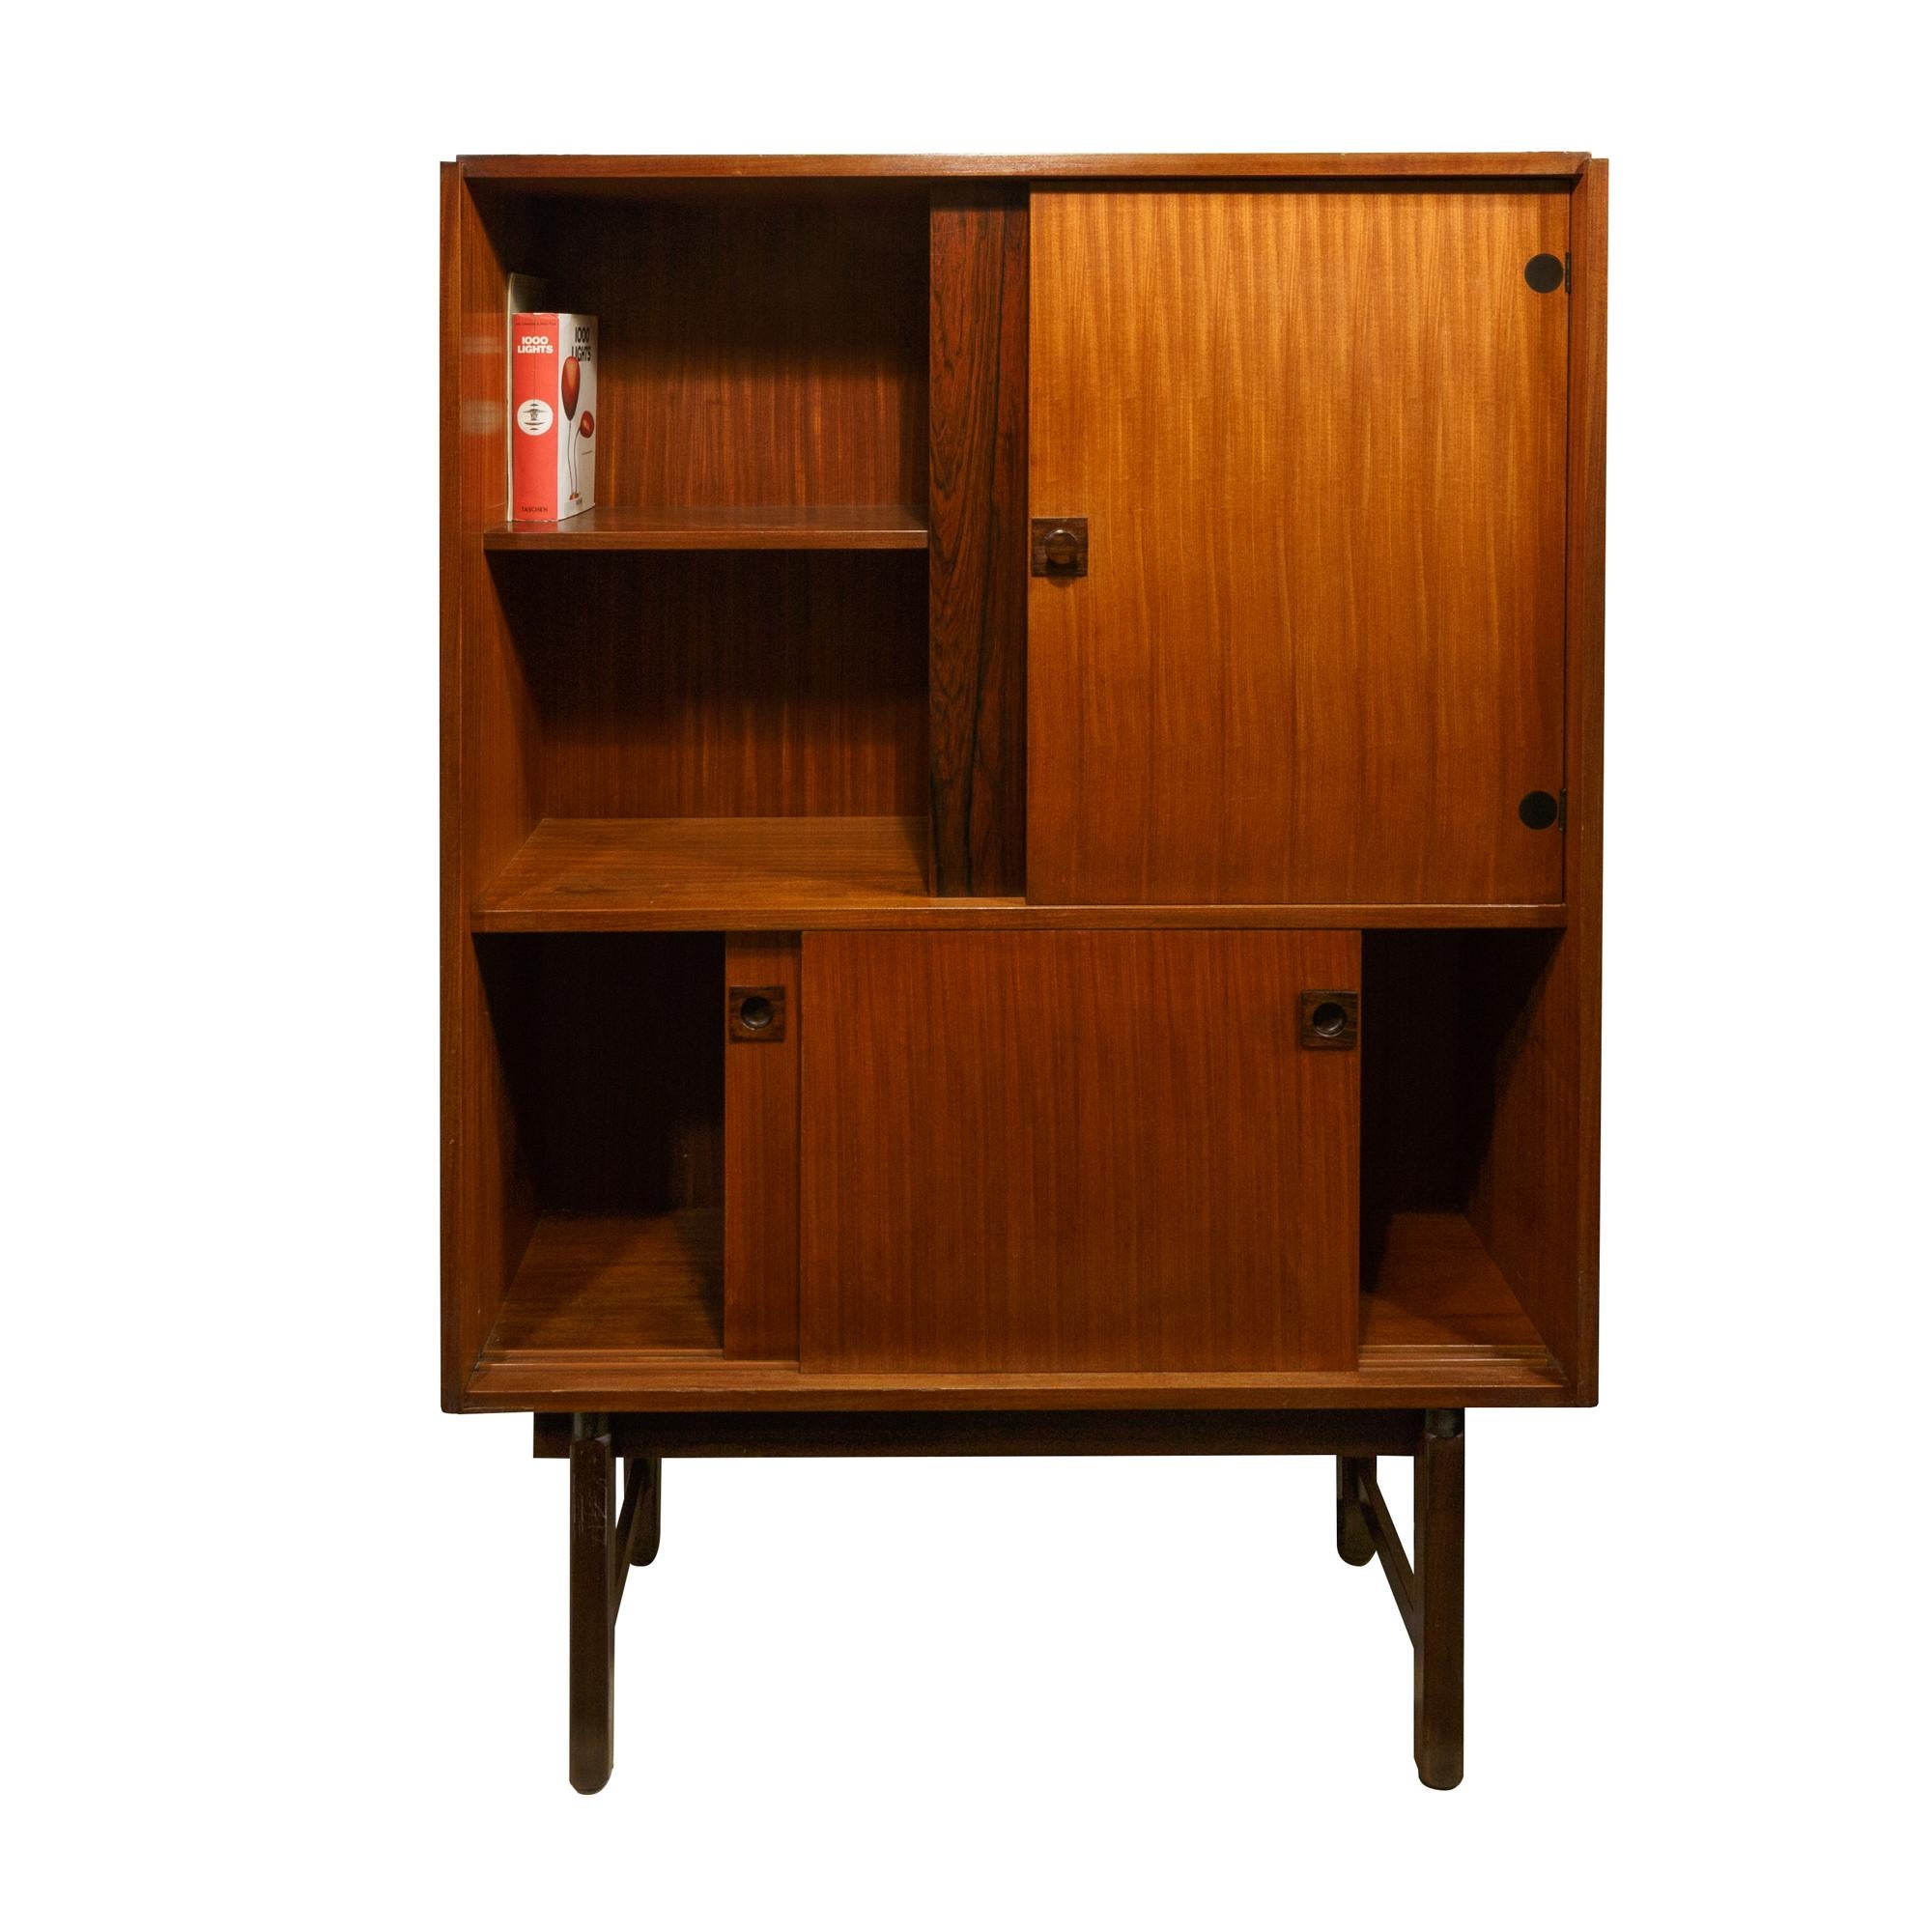 Cabinets by Gianfranco Frattini from Mobili Cantu, Italy, 1960s. The cabinet in the upper part has an open compartment and closed part with door. In the lower part two sliding doors. The main feature is the high legs and the round and black finishes